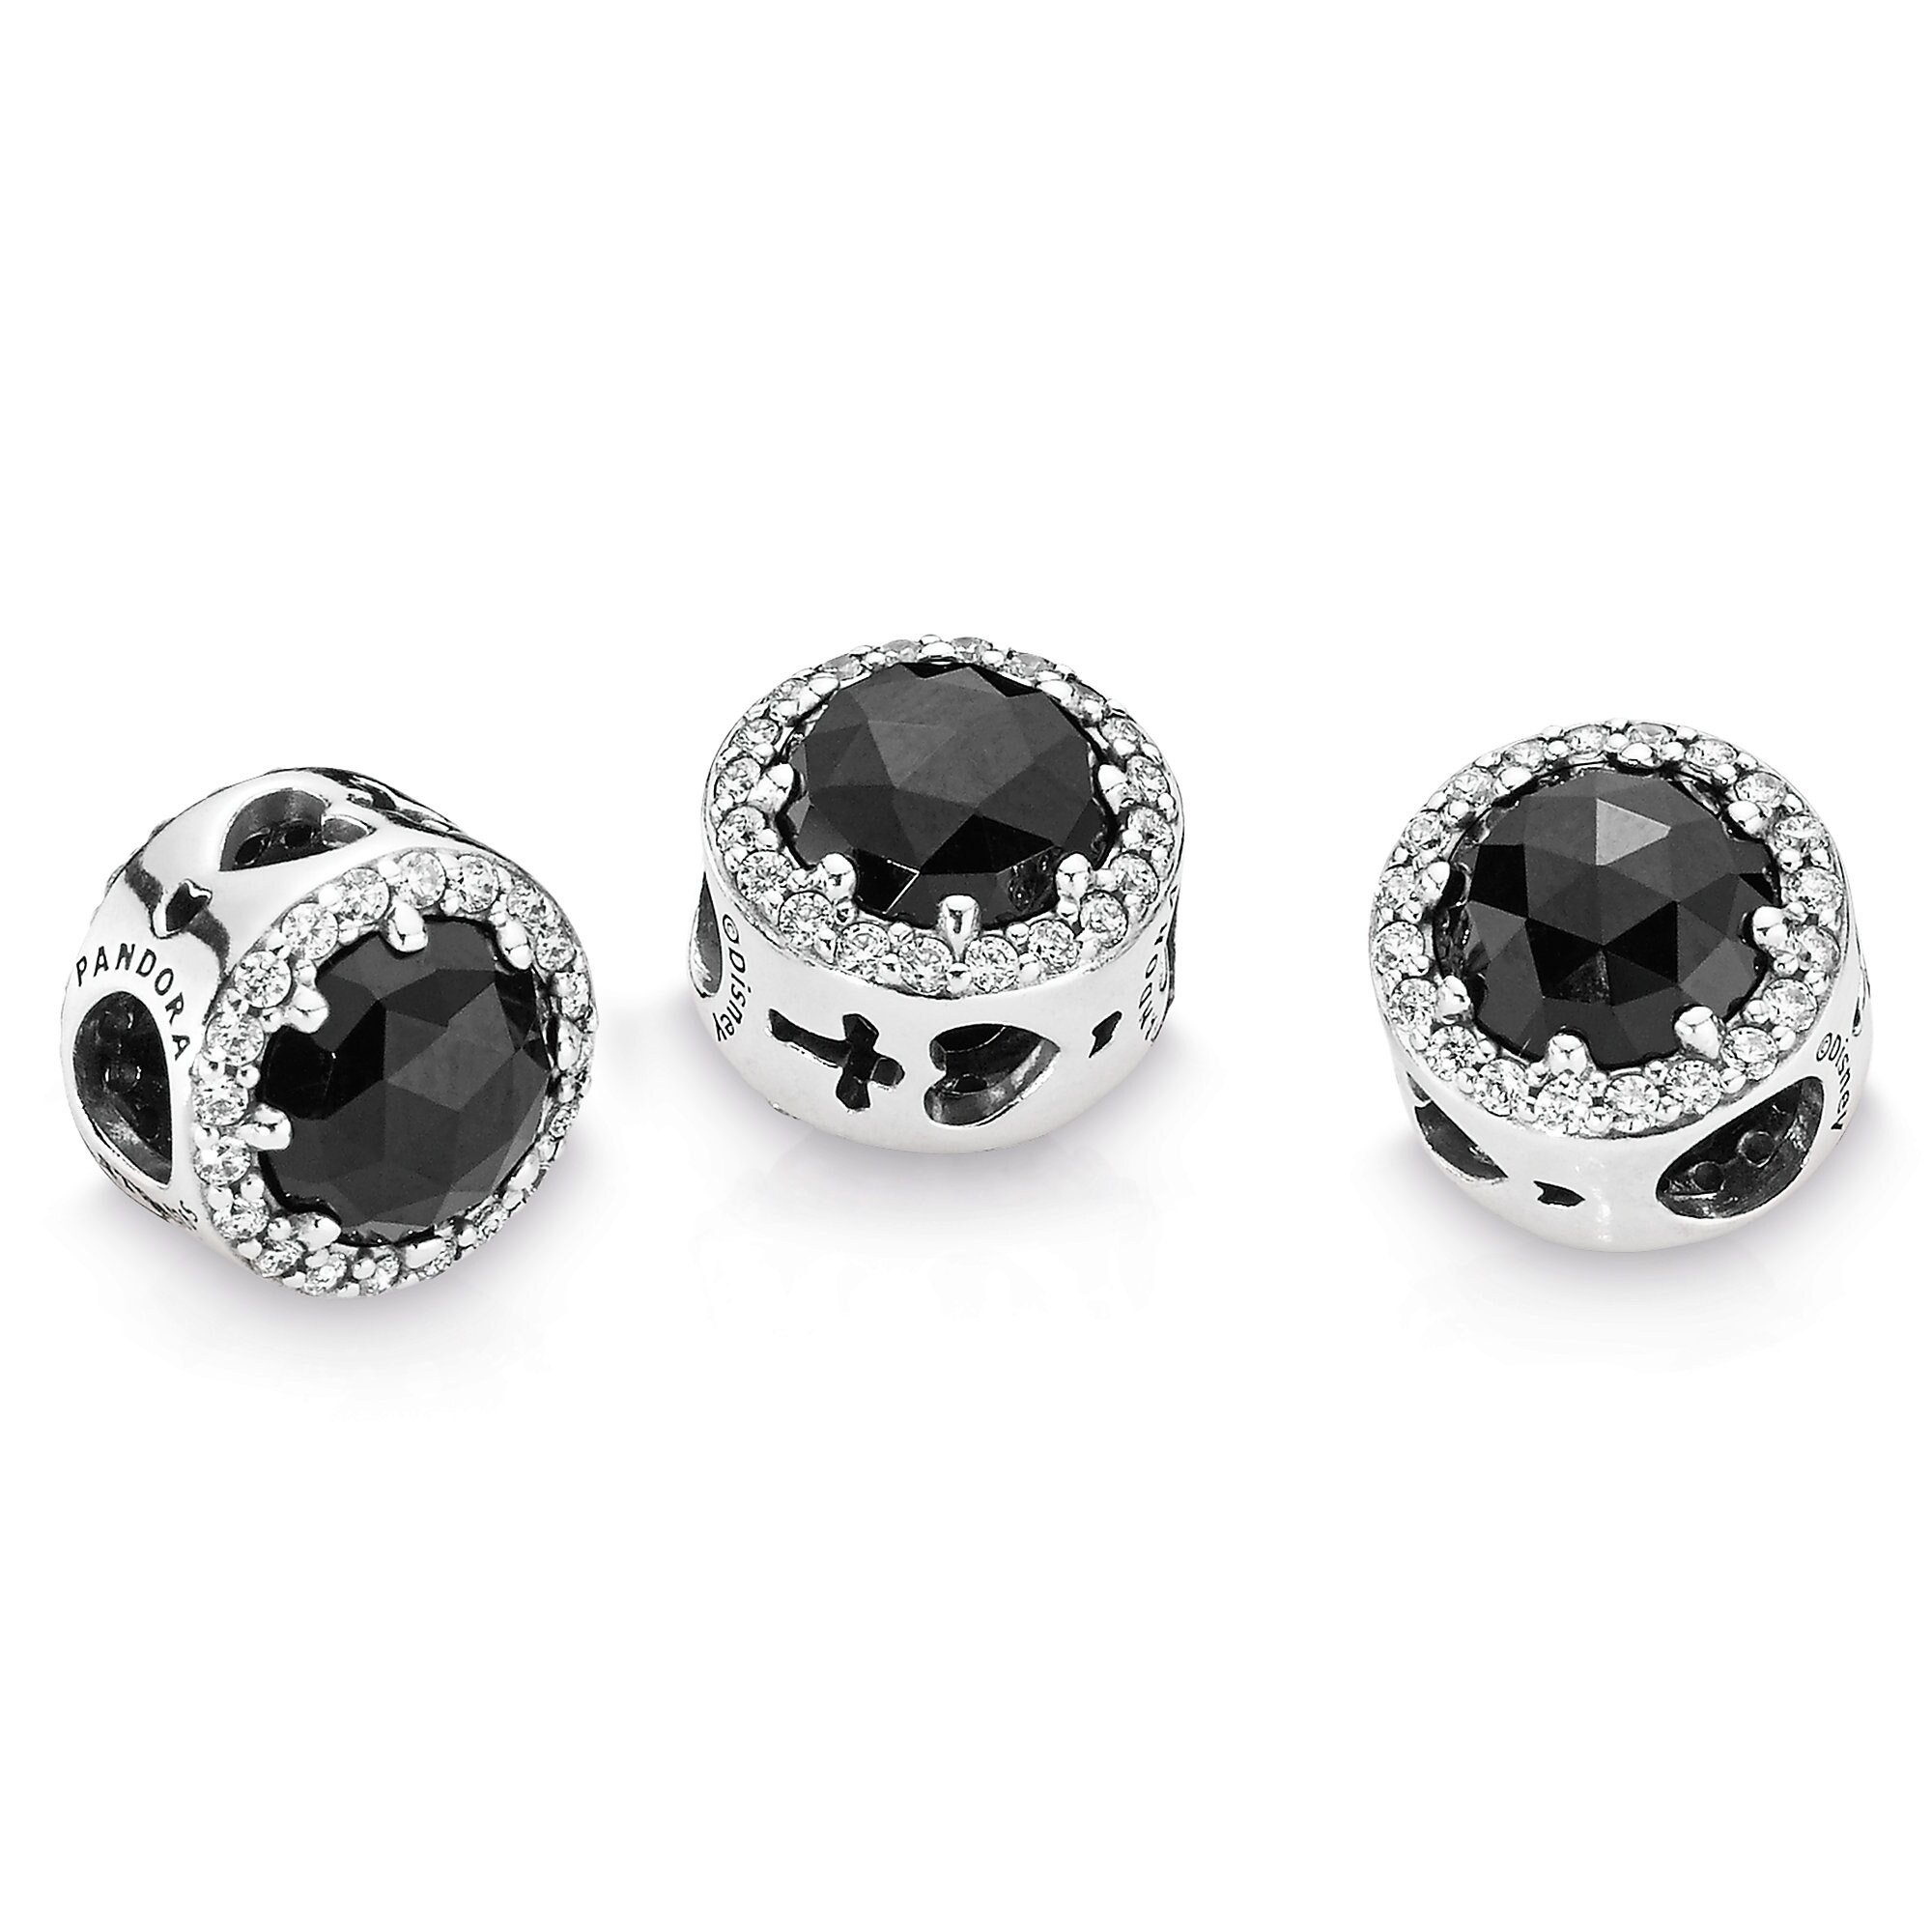 Evil Queen Black Magic Charm by Pandora Jewelry is available online ...